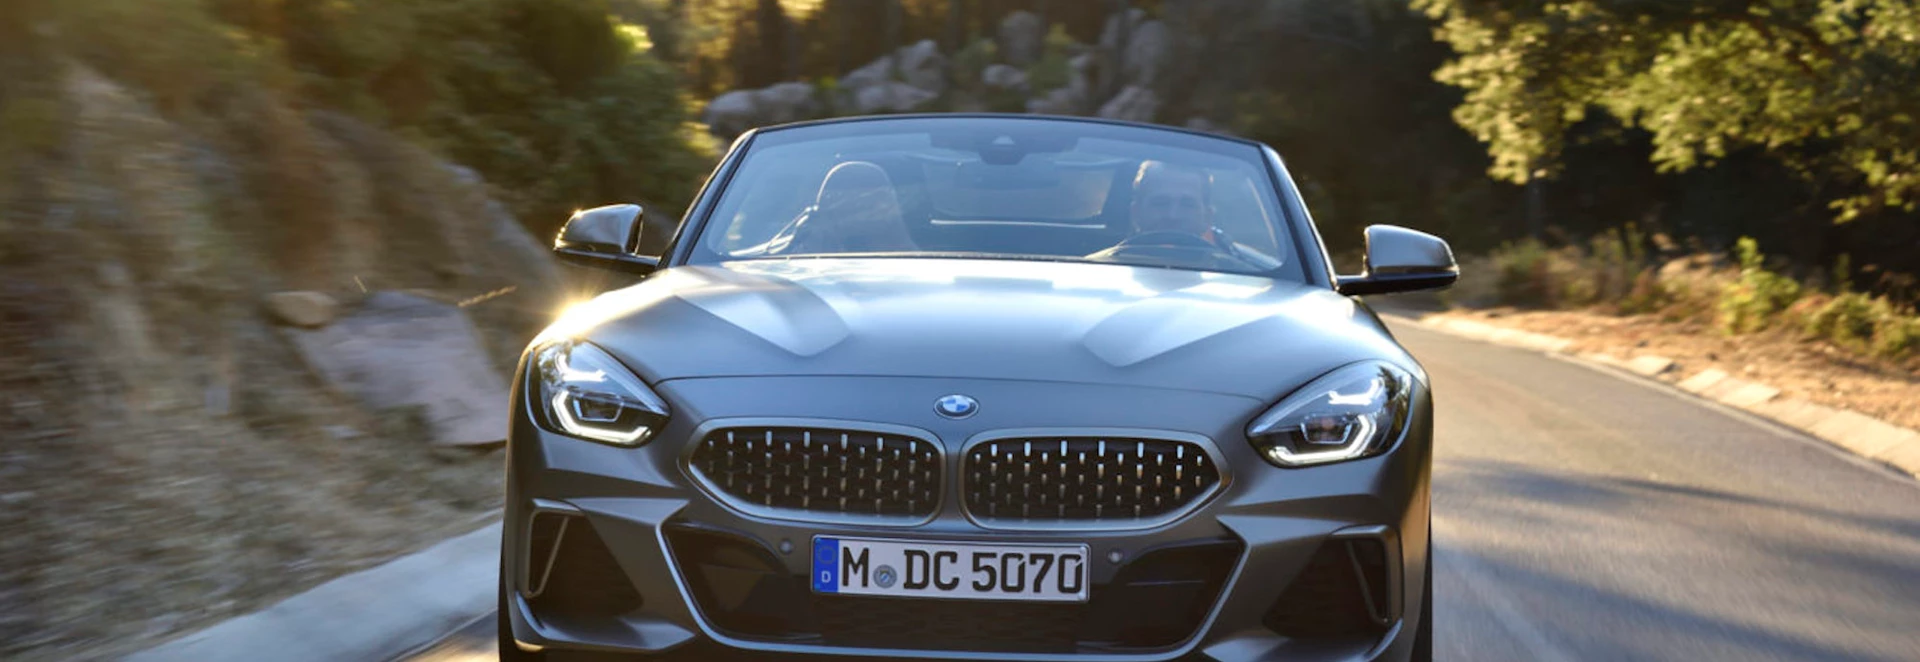 2018 BMW Z4: Old vs New Compared